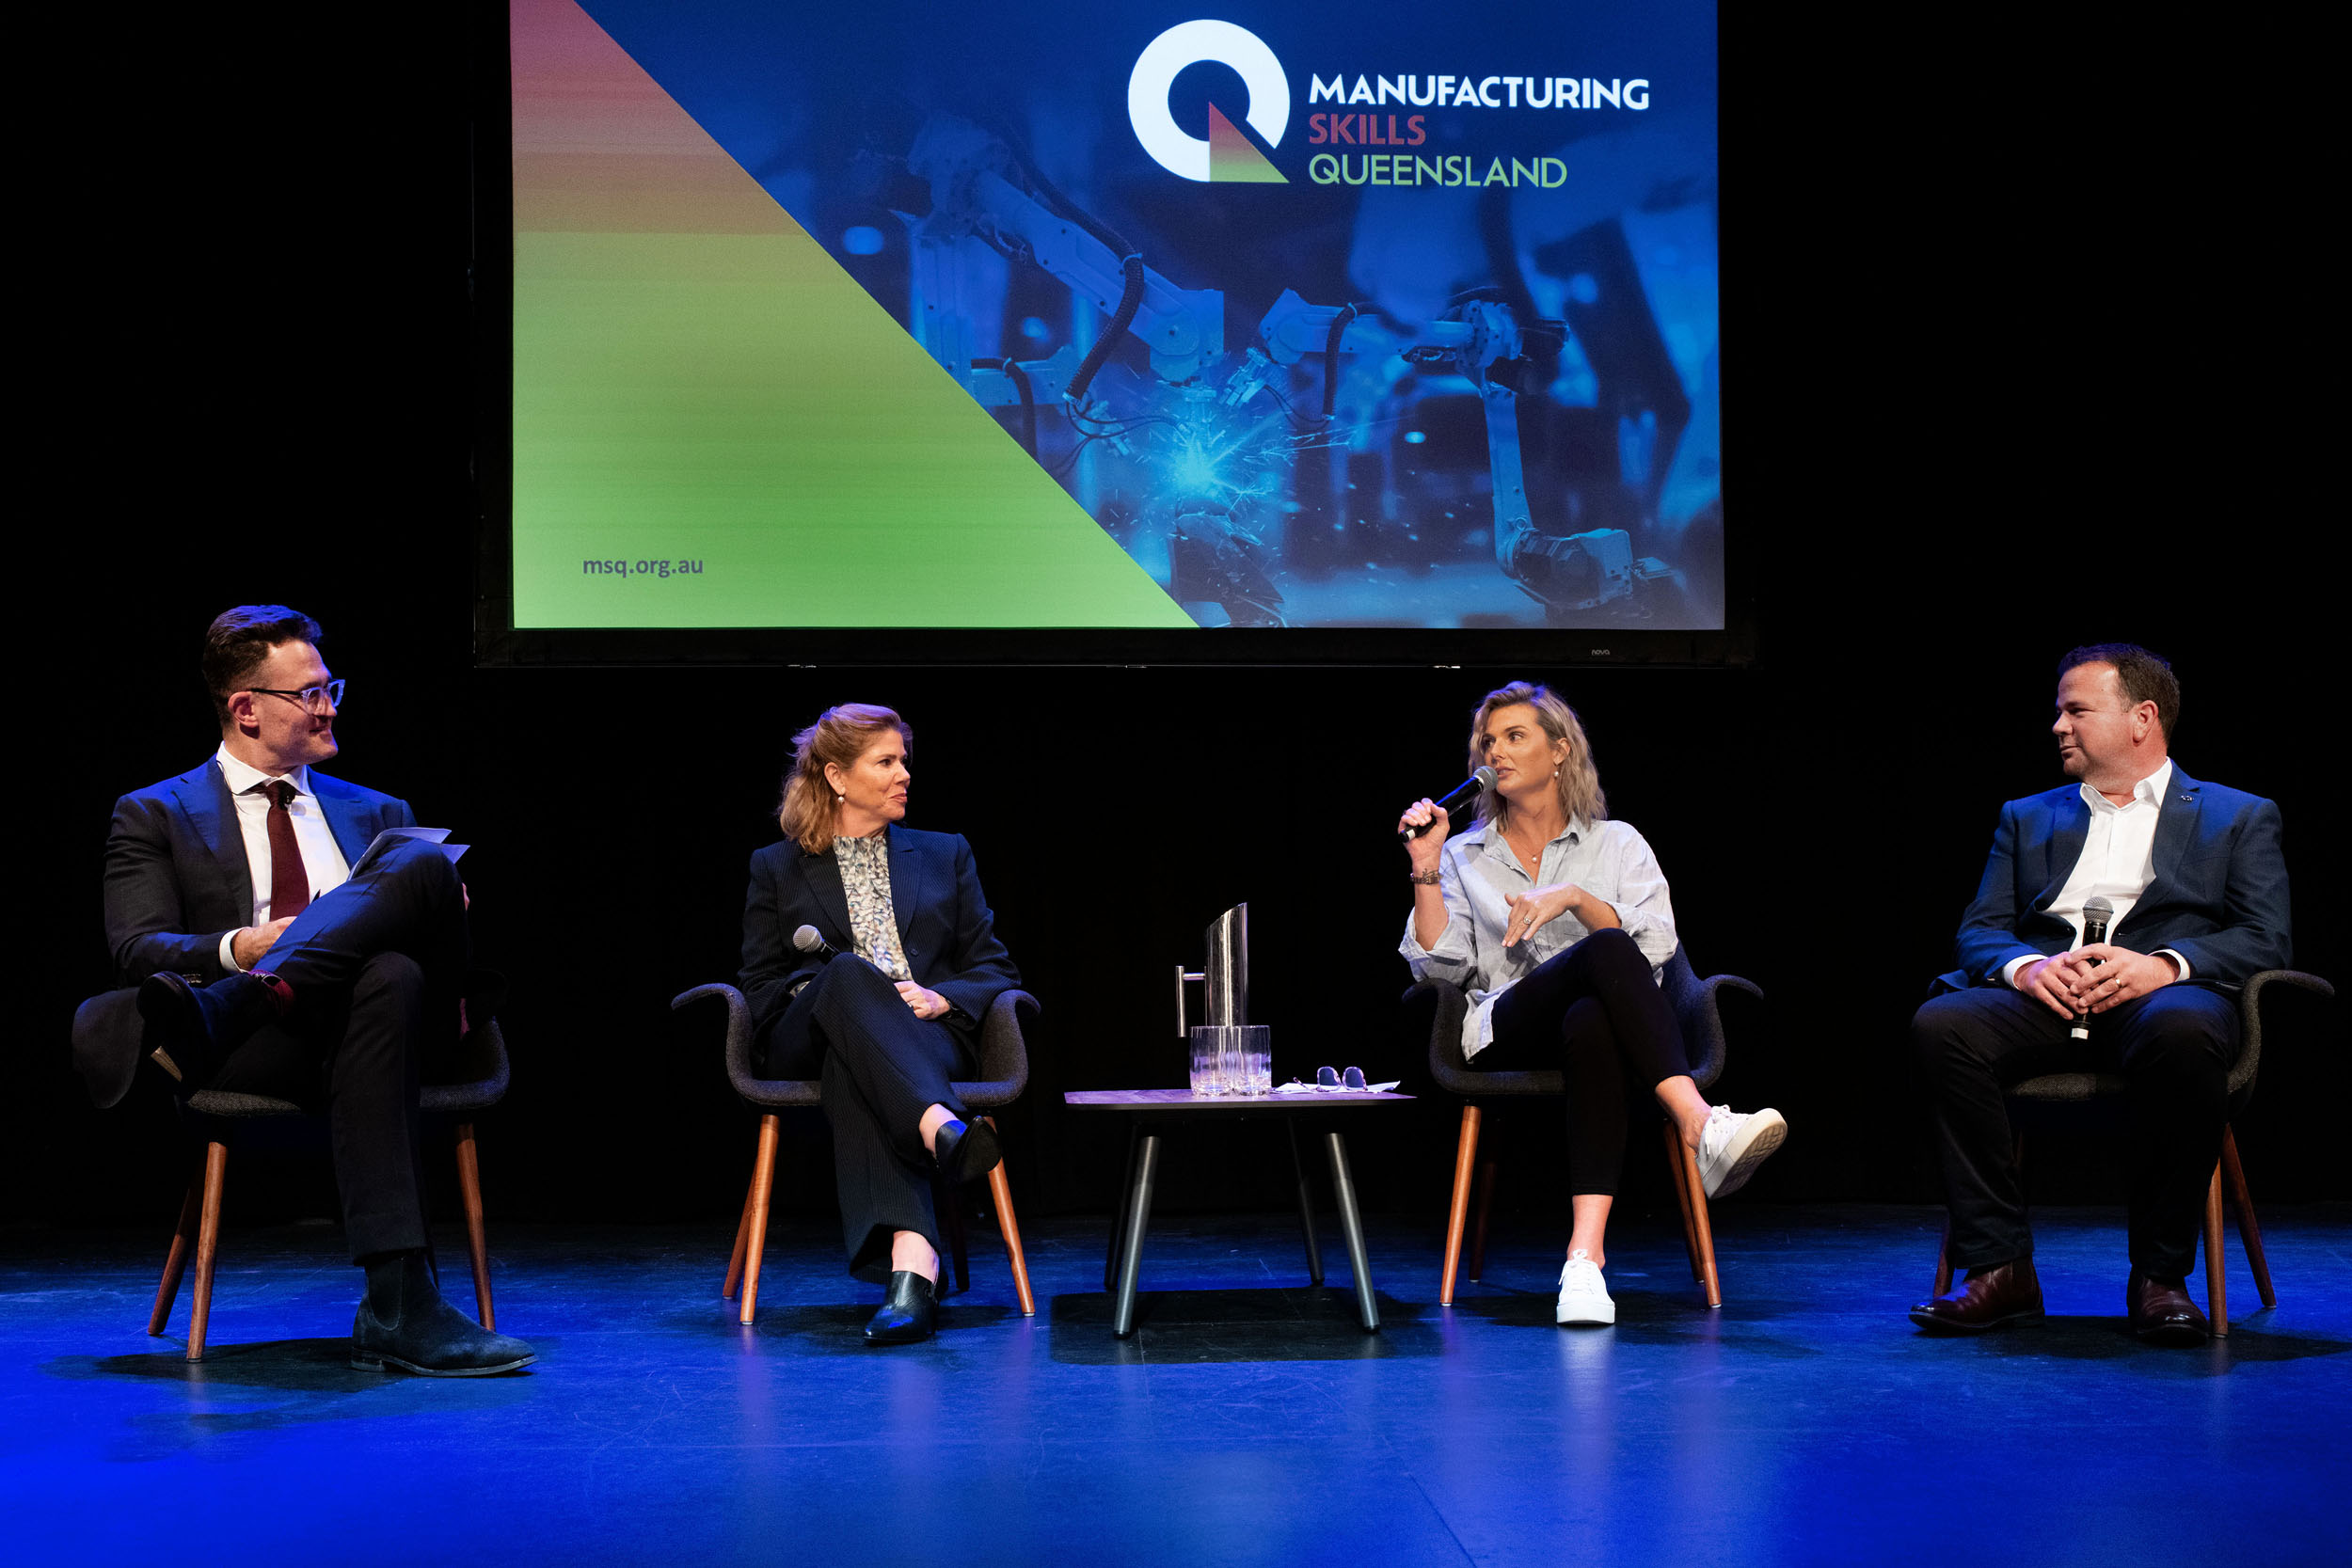 Manufacturing Skills Queensland’s inaugural industry event Image